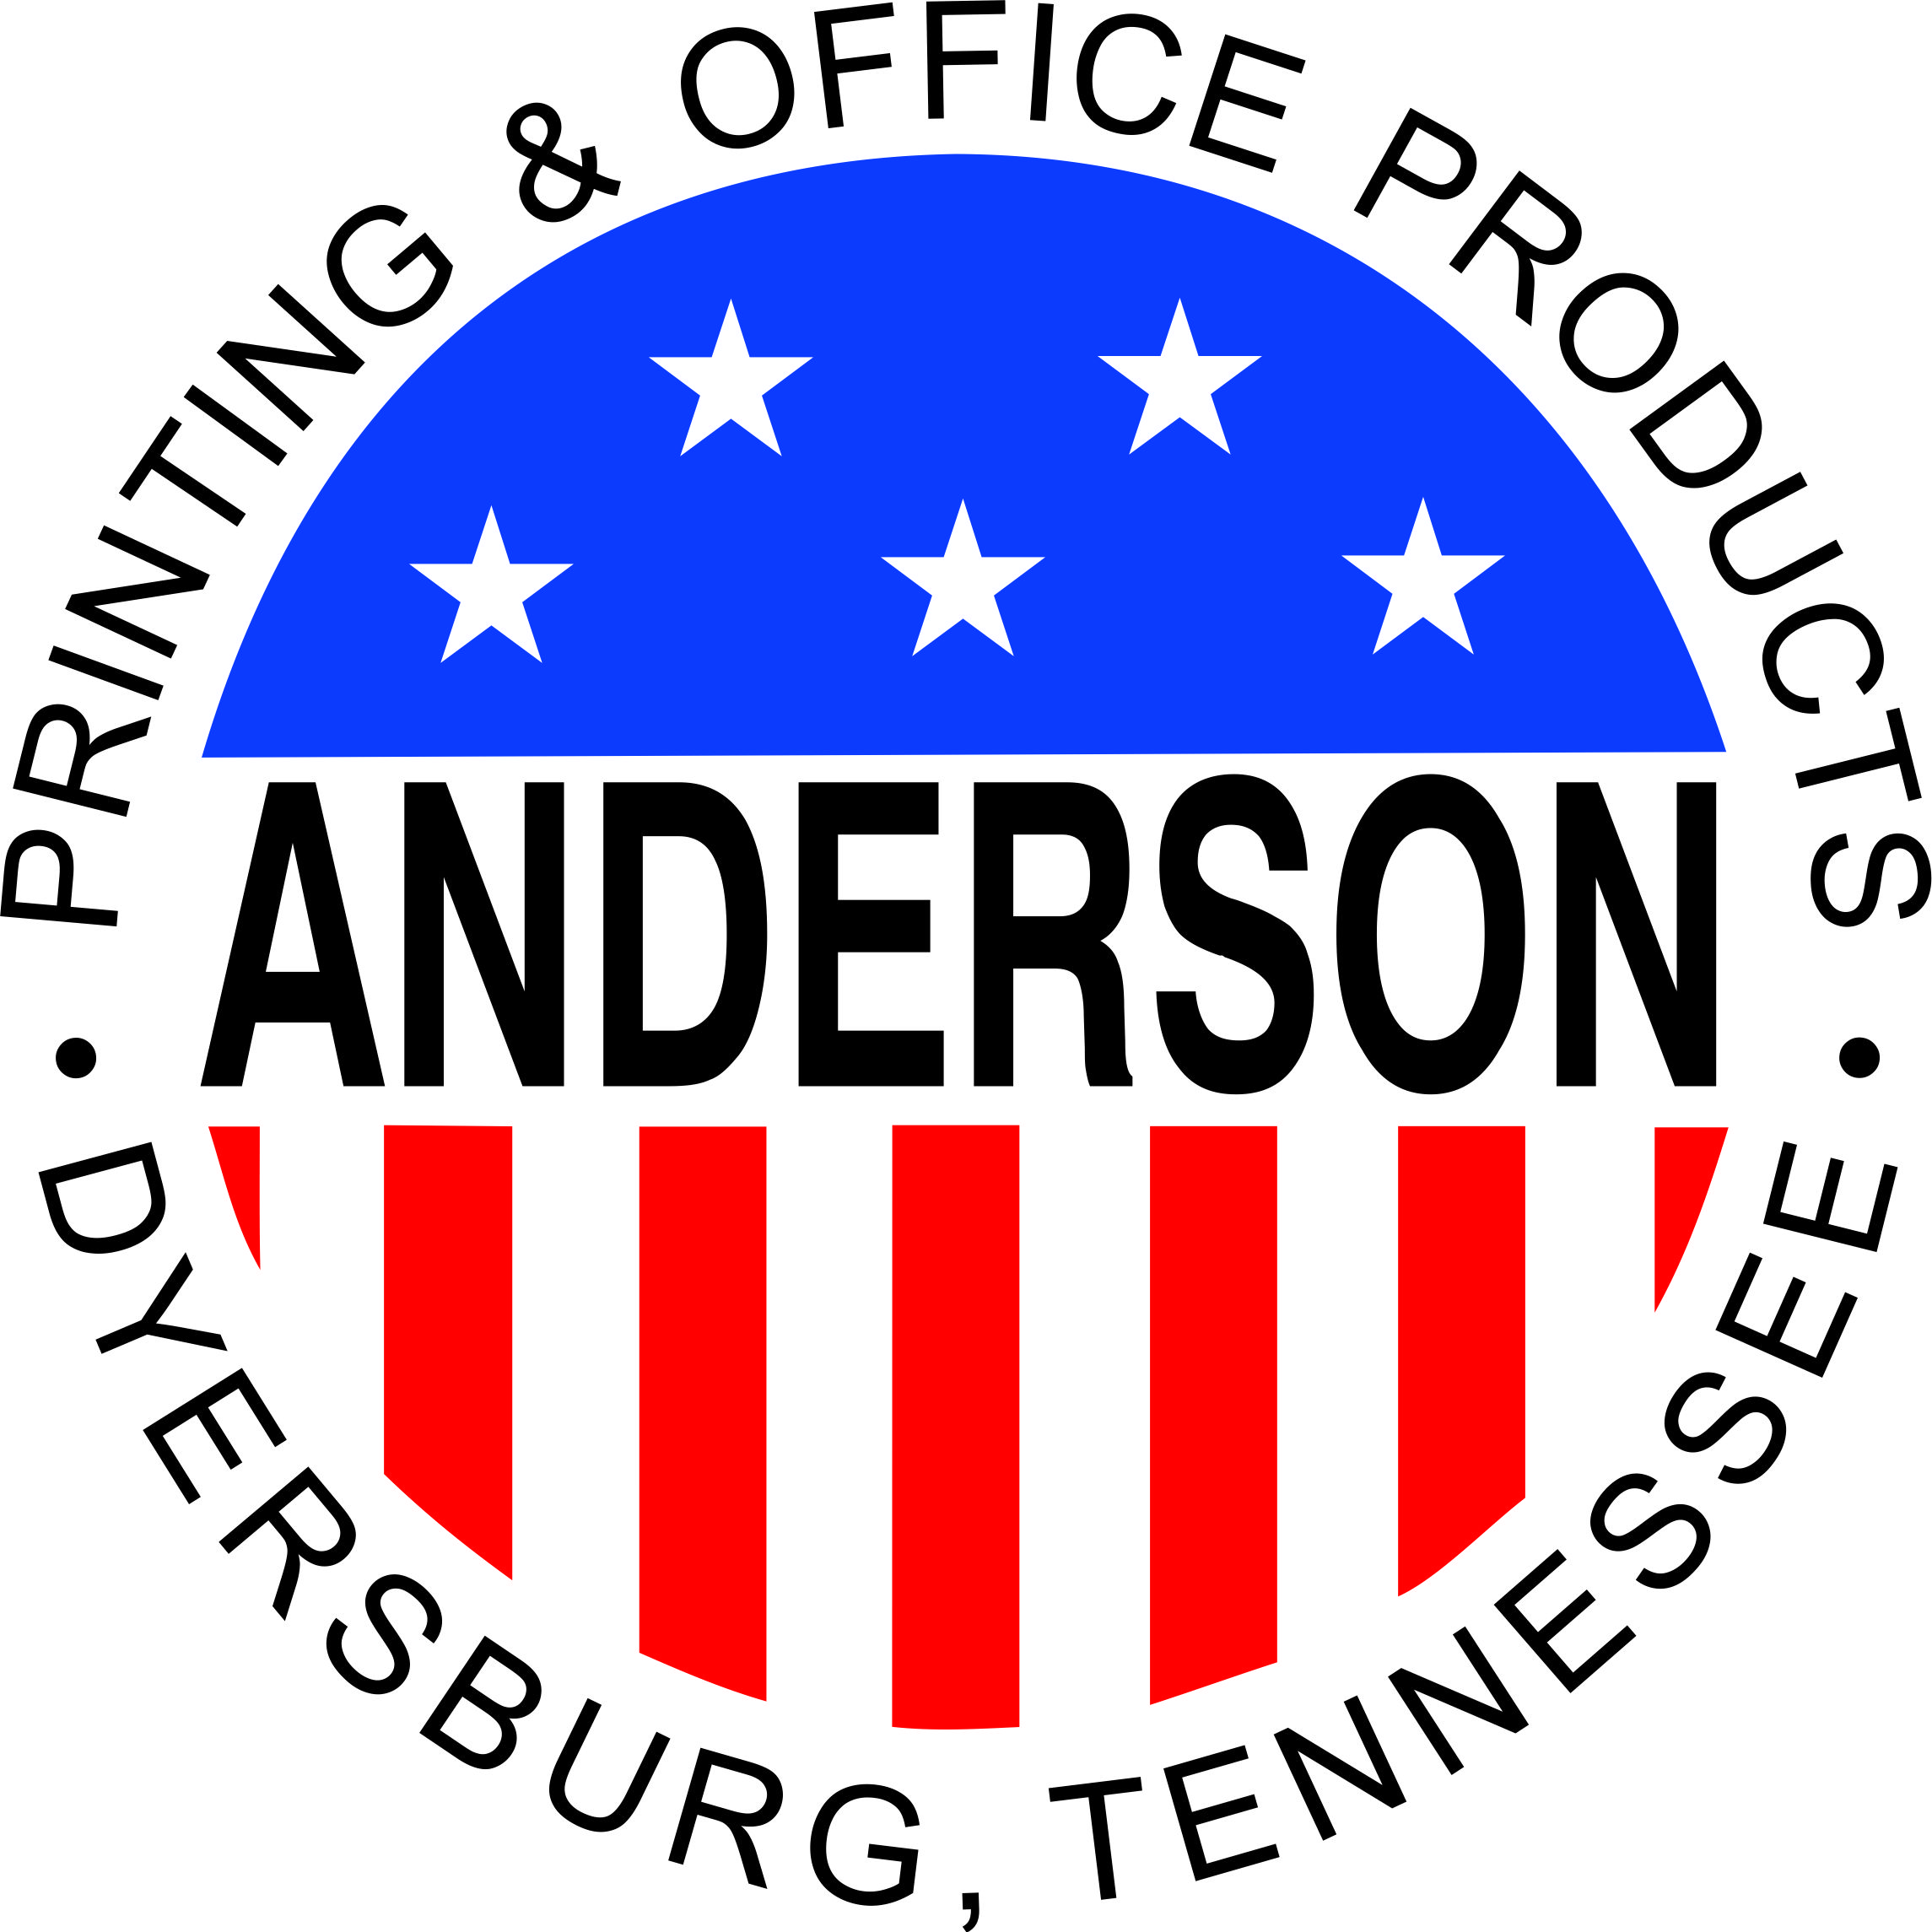 Anderson Printing & Office Products